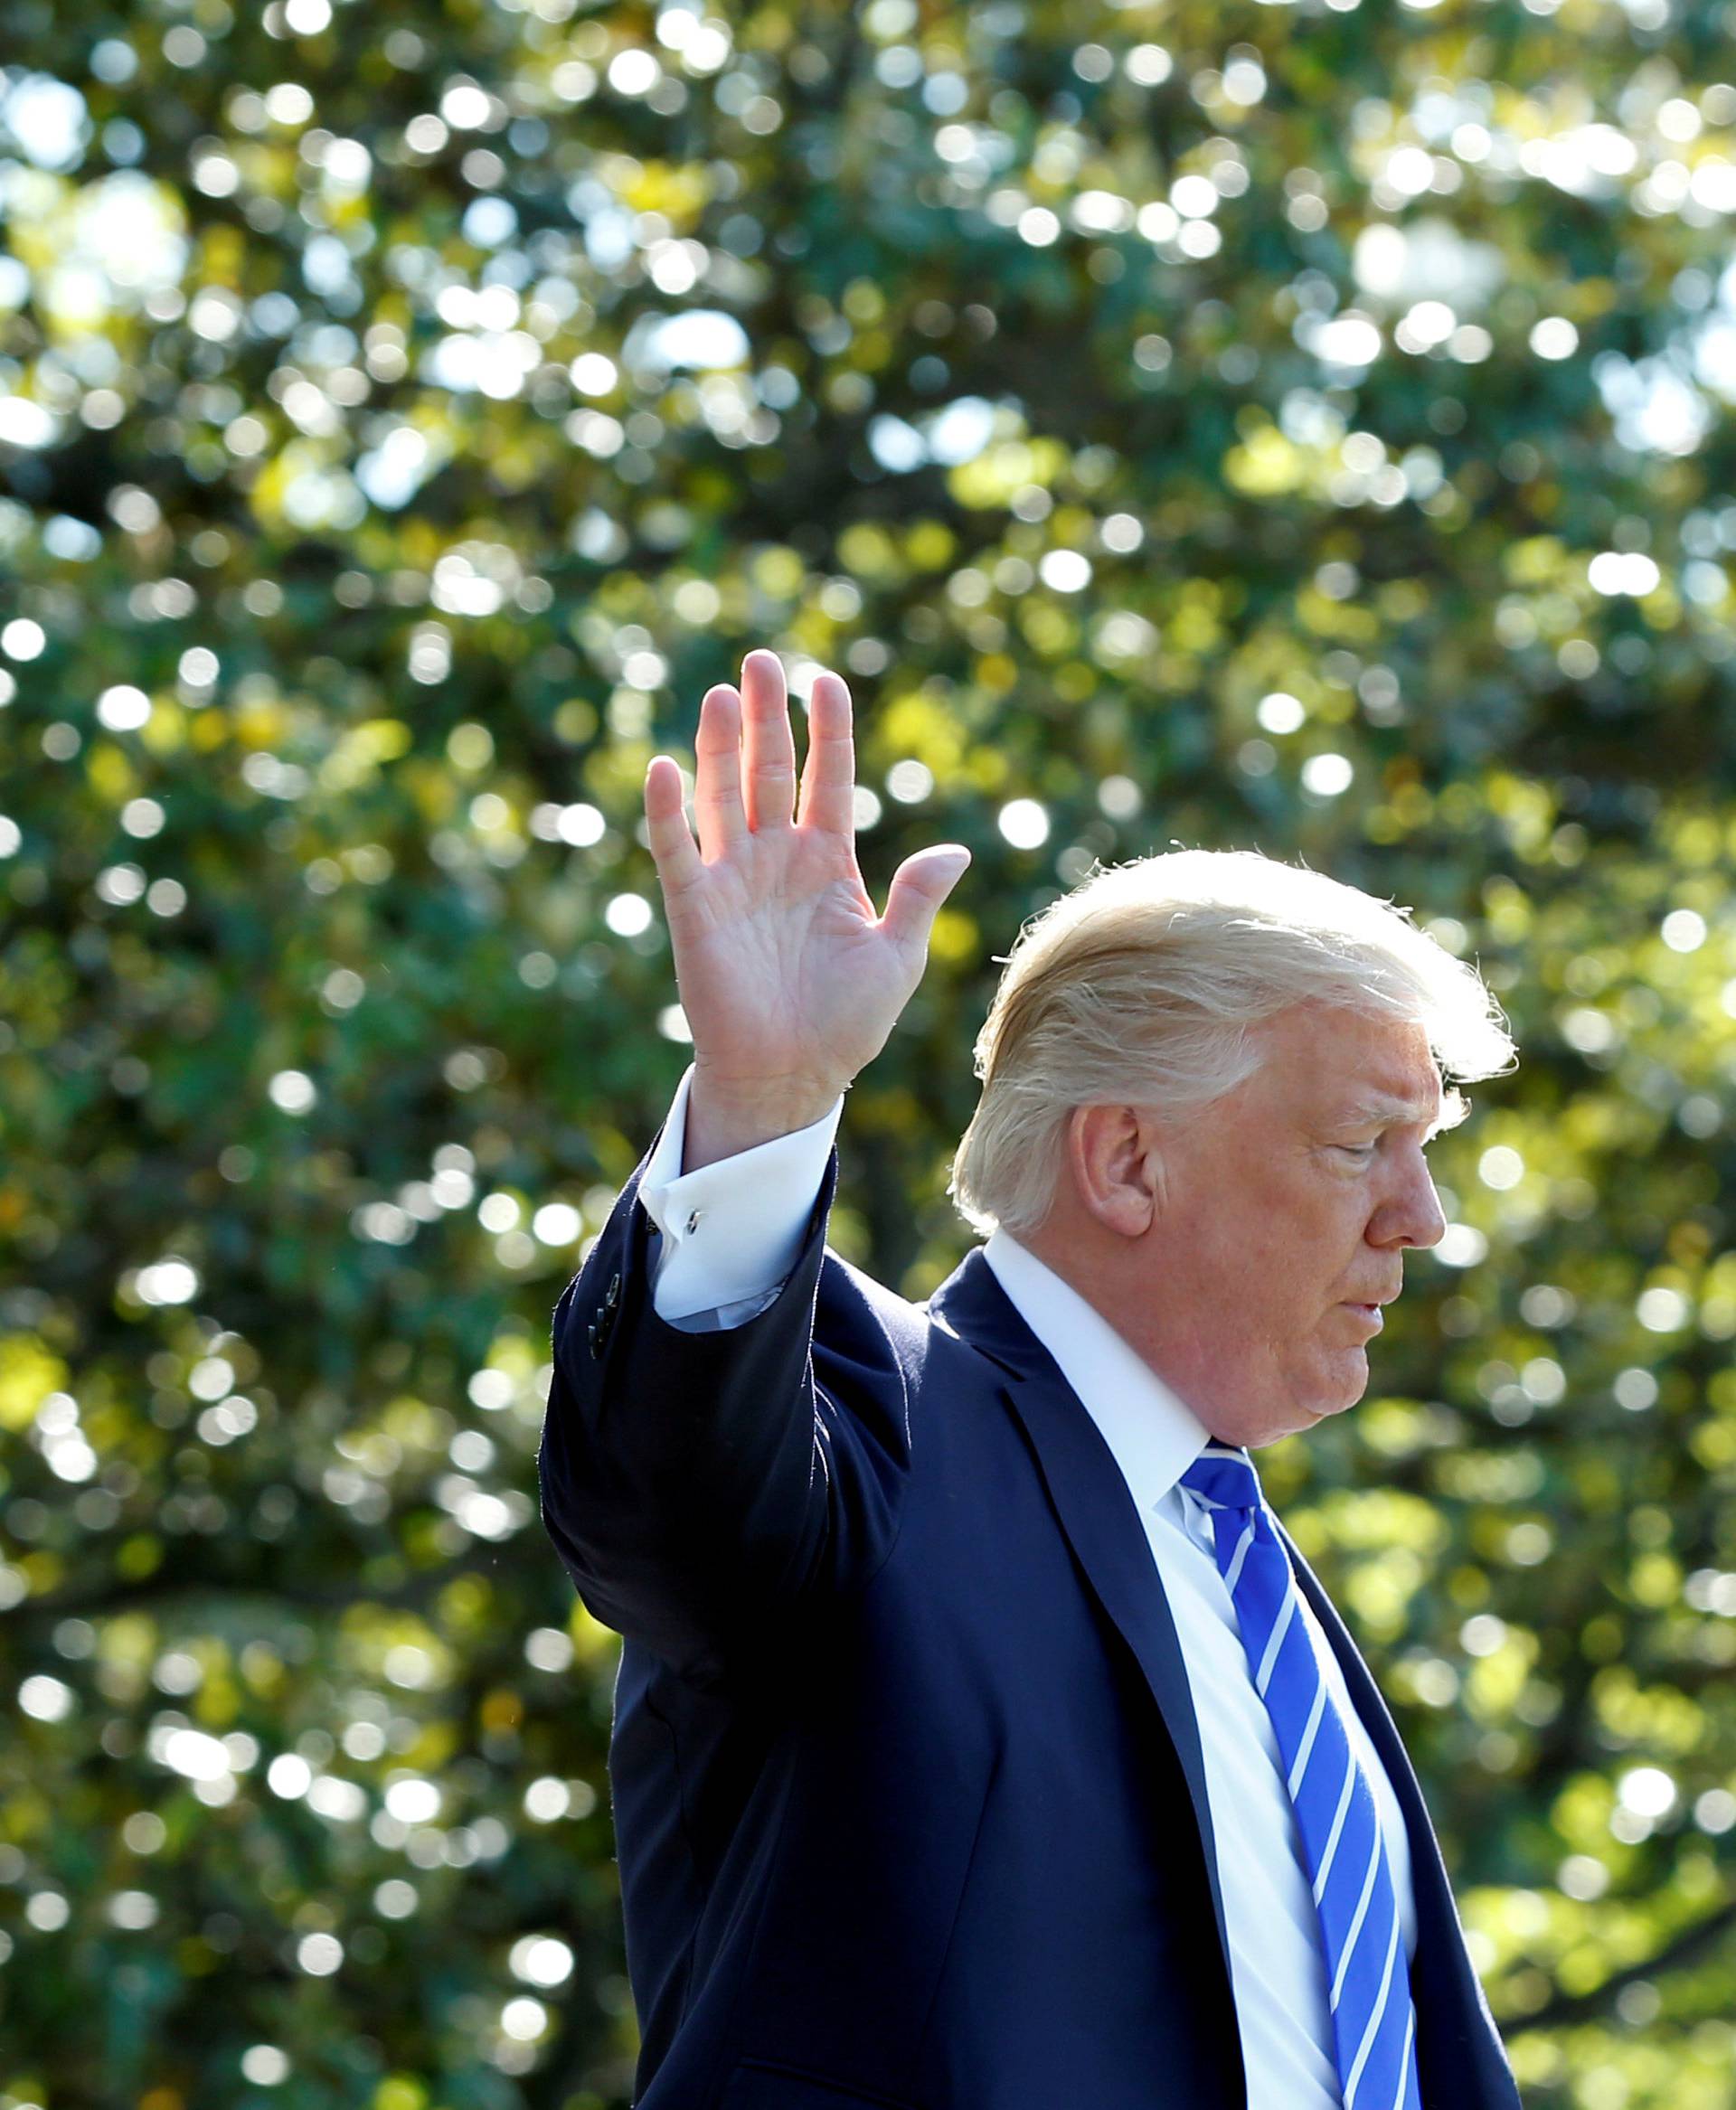 FILE PHOTO: U.S. President Donald Trump waves as he walks on the South Lawn of the White House in Washington